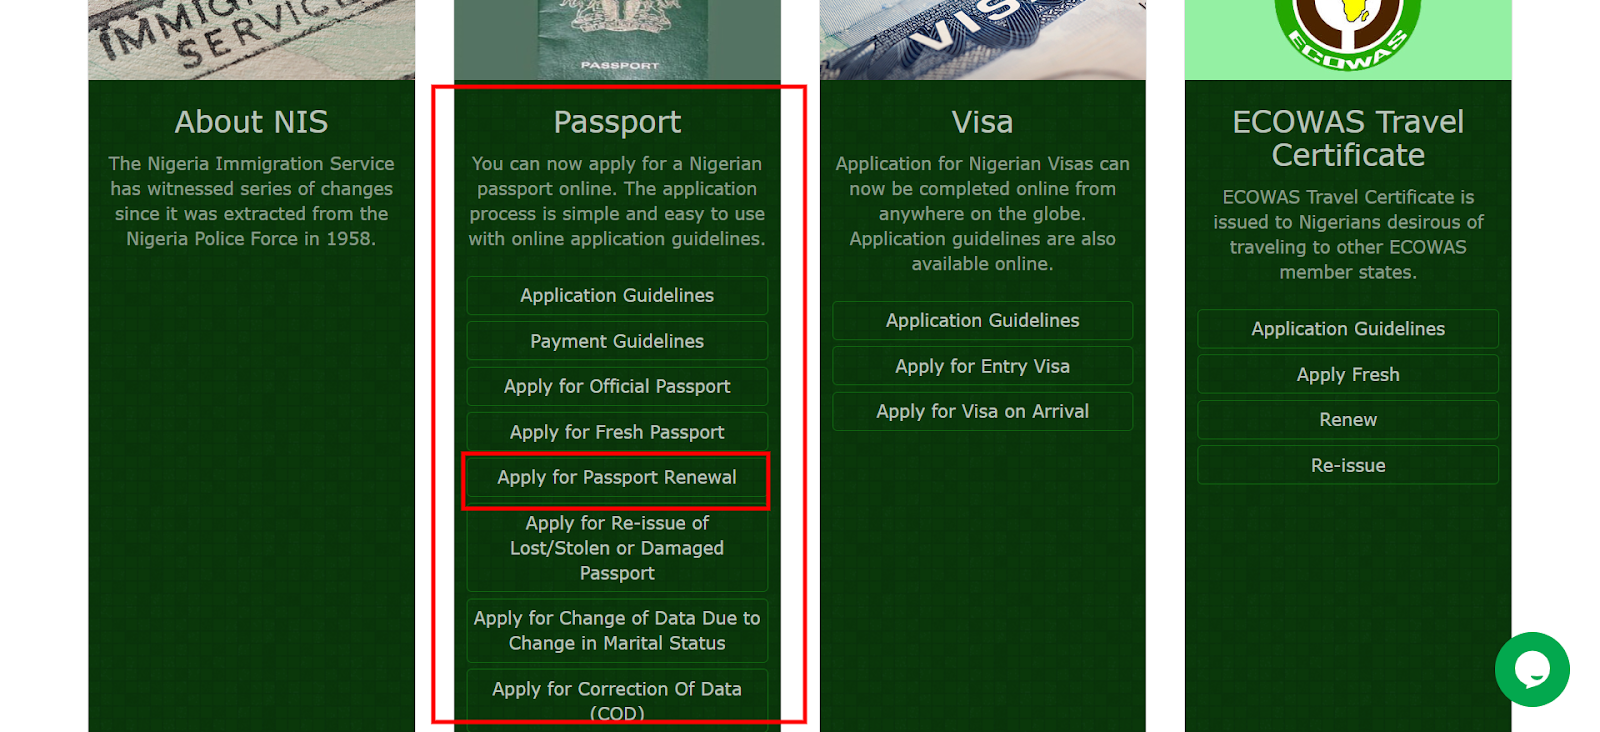 How to Renew a Nigerian Passport in China